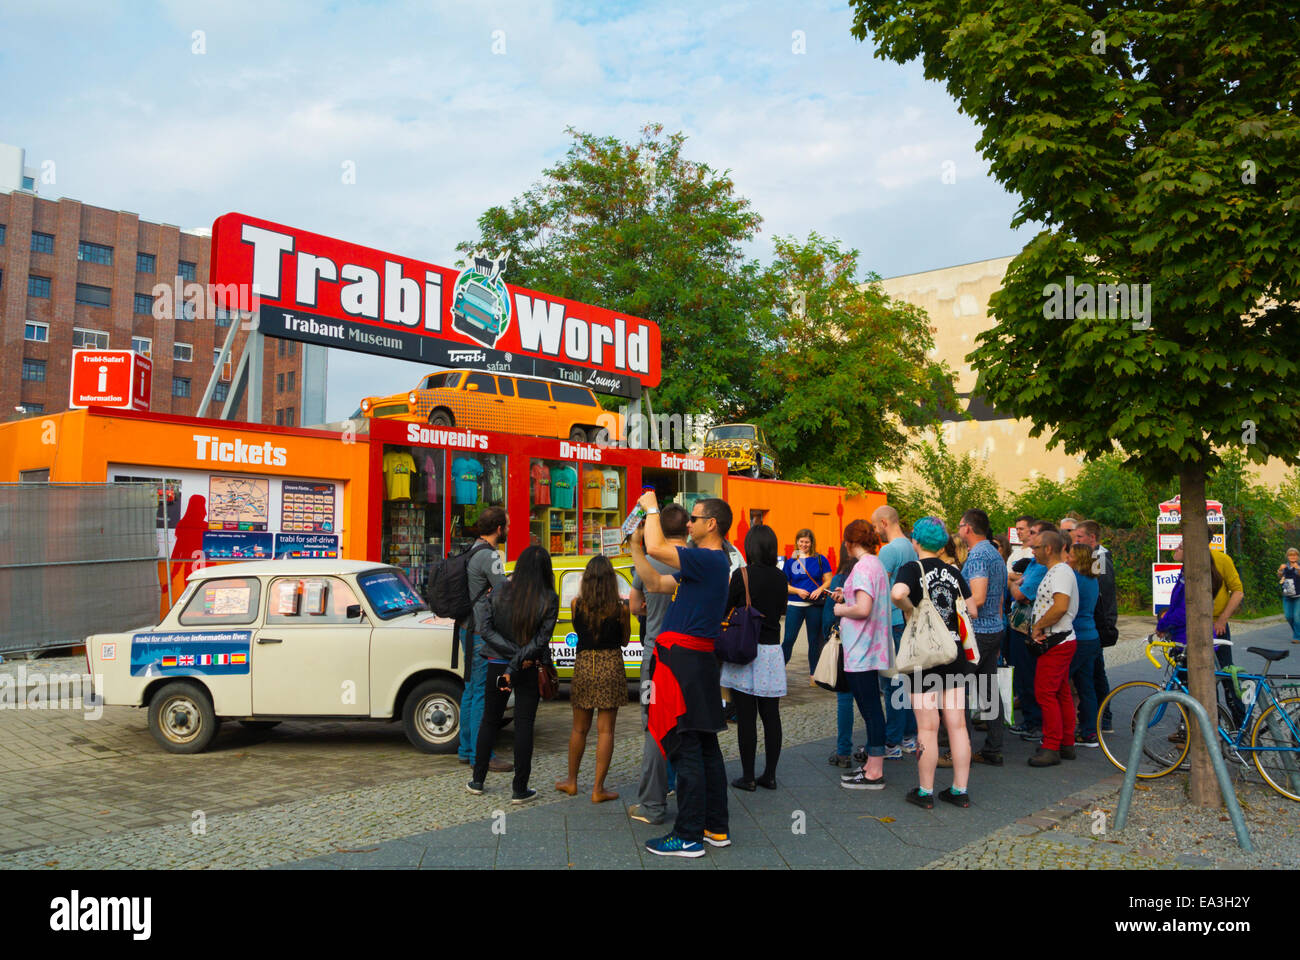 Tour group in front of Trabi world, Trabant museum exterior, Friedrichstadt, Mitte district, central Berlin, Germany Stock Photo